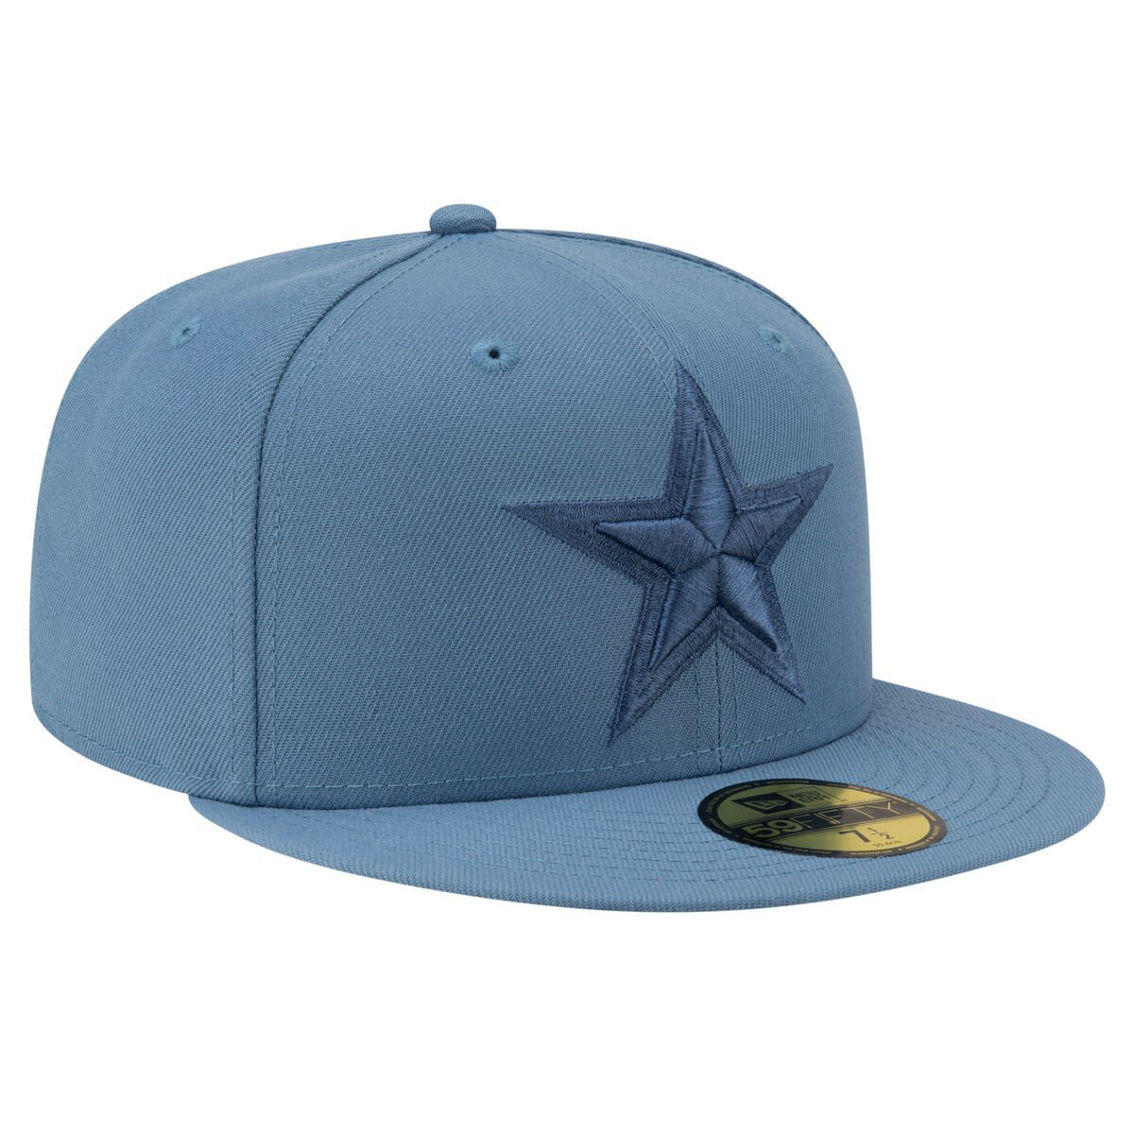 New Era Men's Blue Dallas Cowboys Color Pack 59FIFTY Fitted Hat - Image 4 of 4